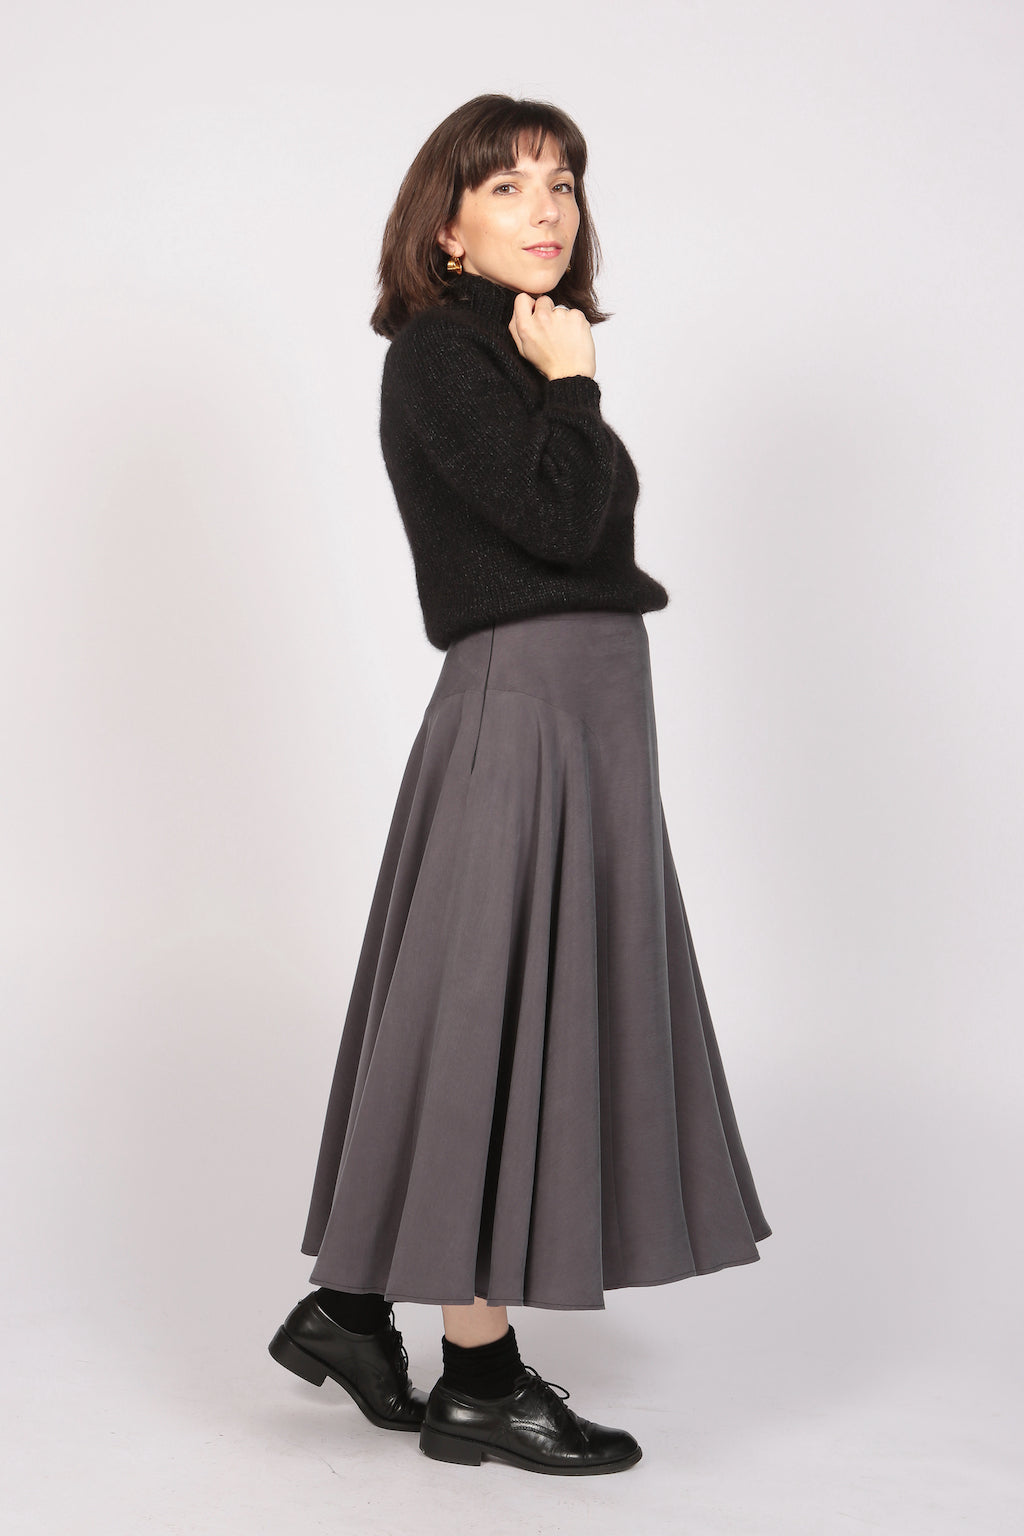 Woman wearing the Averse Skirt sewing pattern from Camimade on The Fold Line. A skirt pattern made in viscose, tencel, linen, cotton lawn or chambray fabrics, featuring a side invisible zip, midi length finish, curved waistband and a full skirt giving the